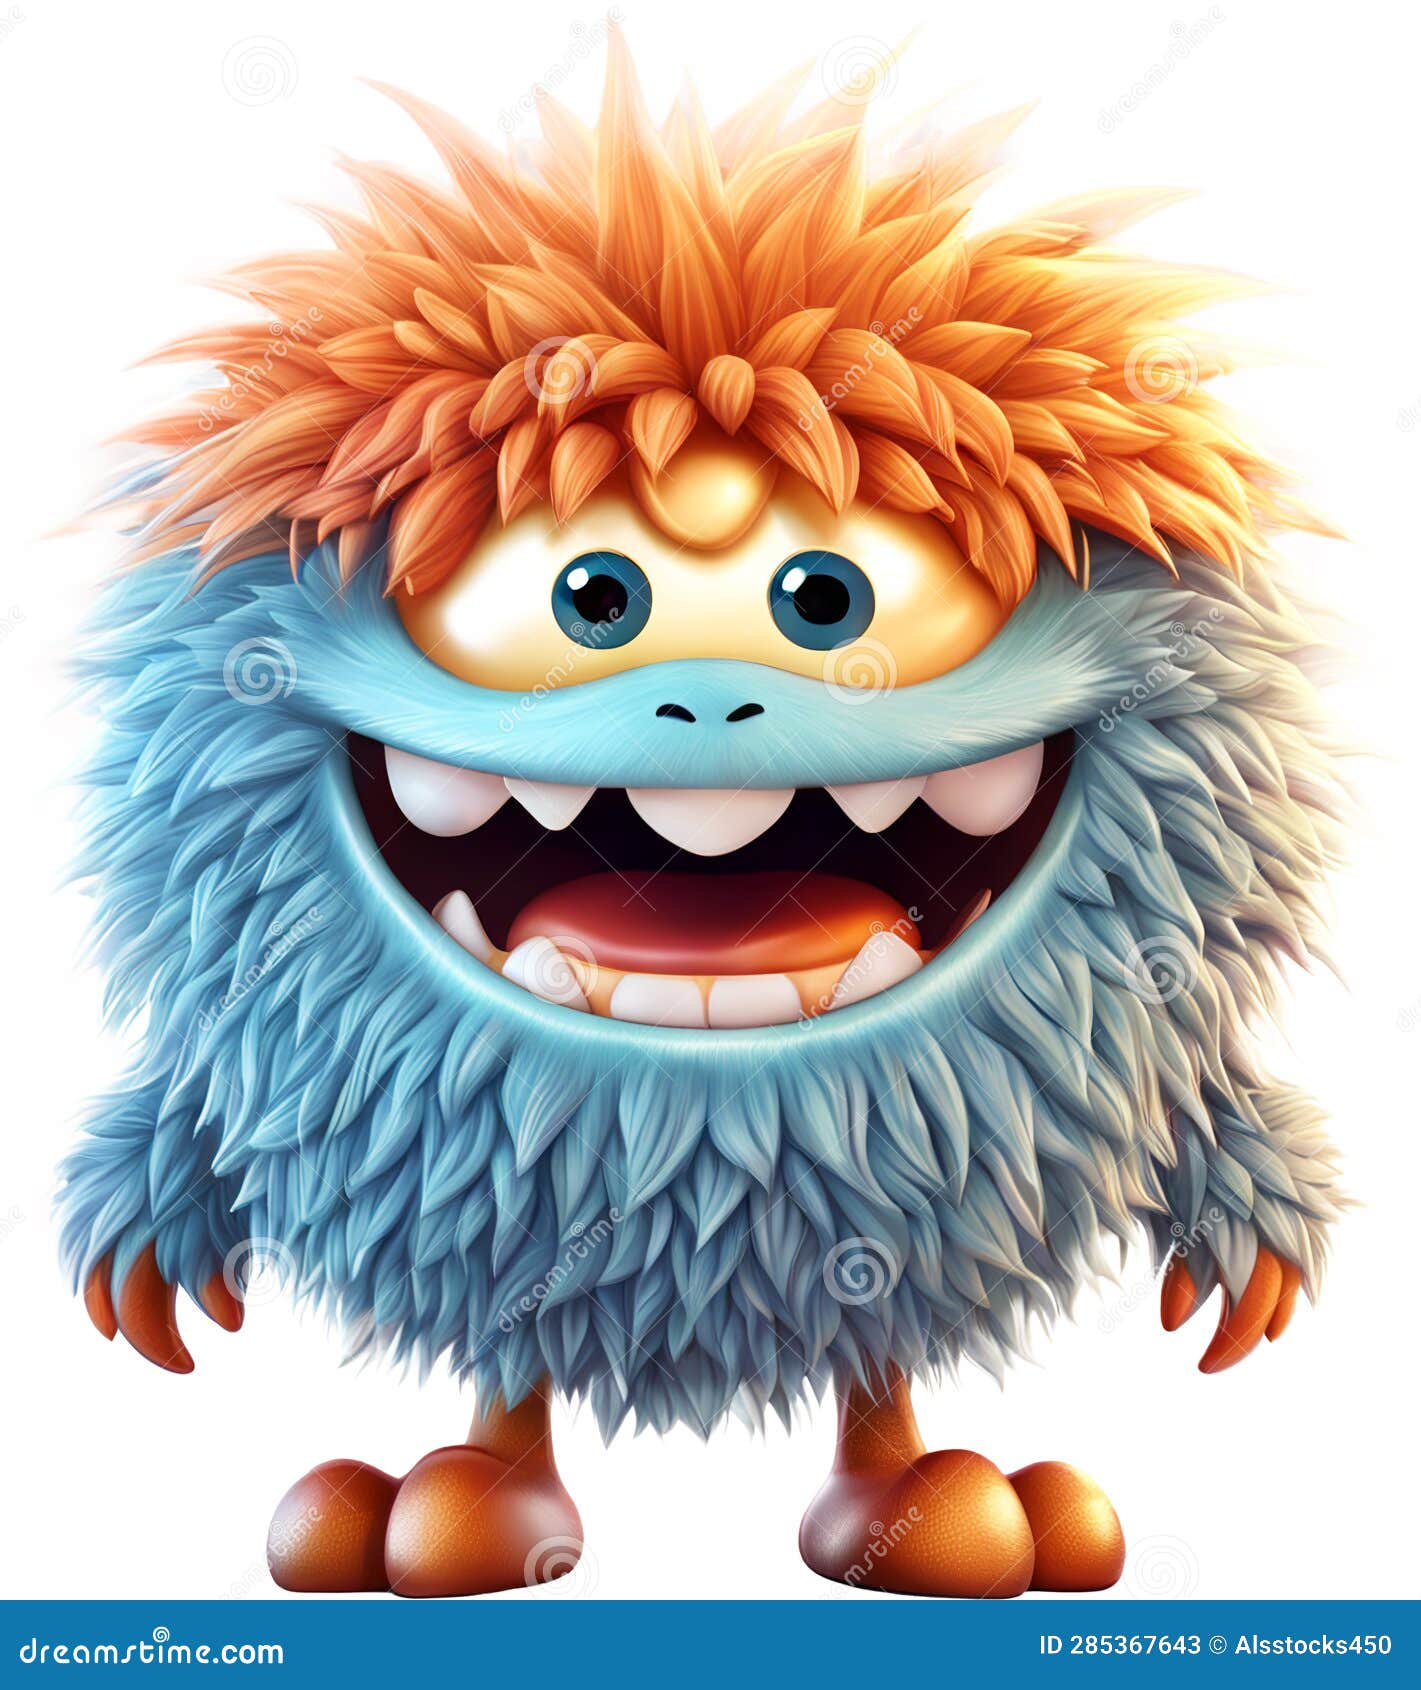 Funny Furry Cheerful Monster Stock Illustration - Illustration of furry ...